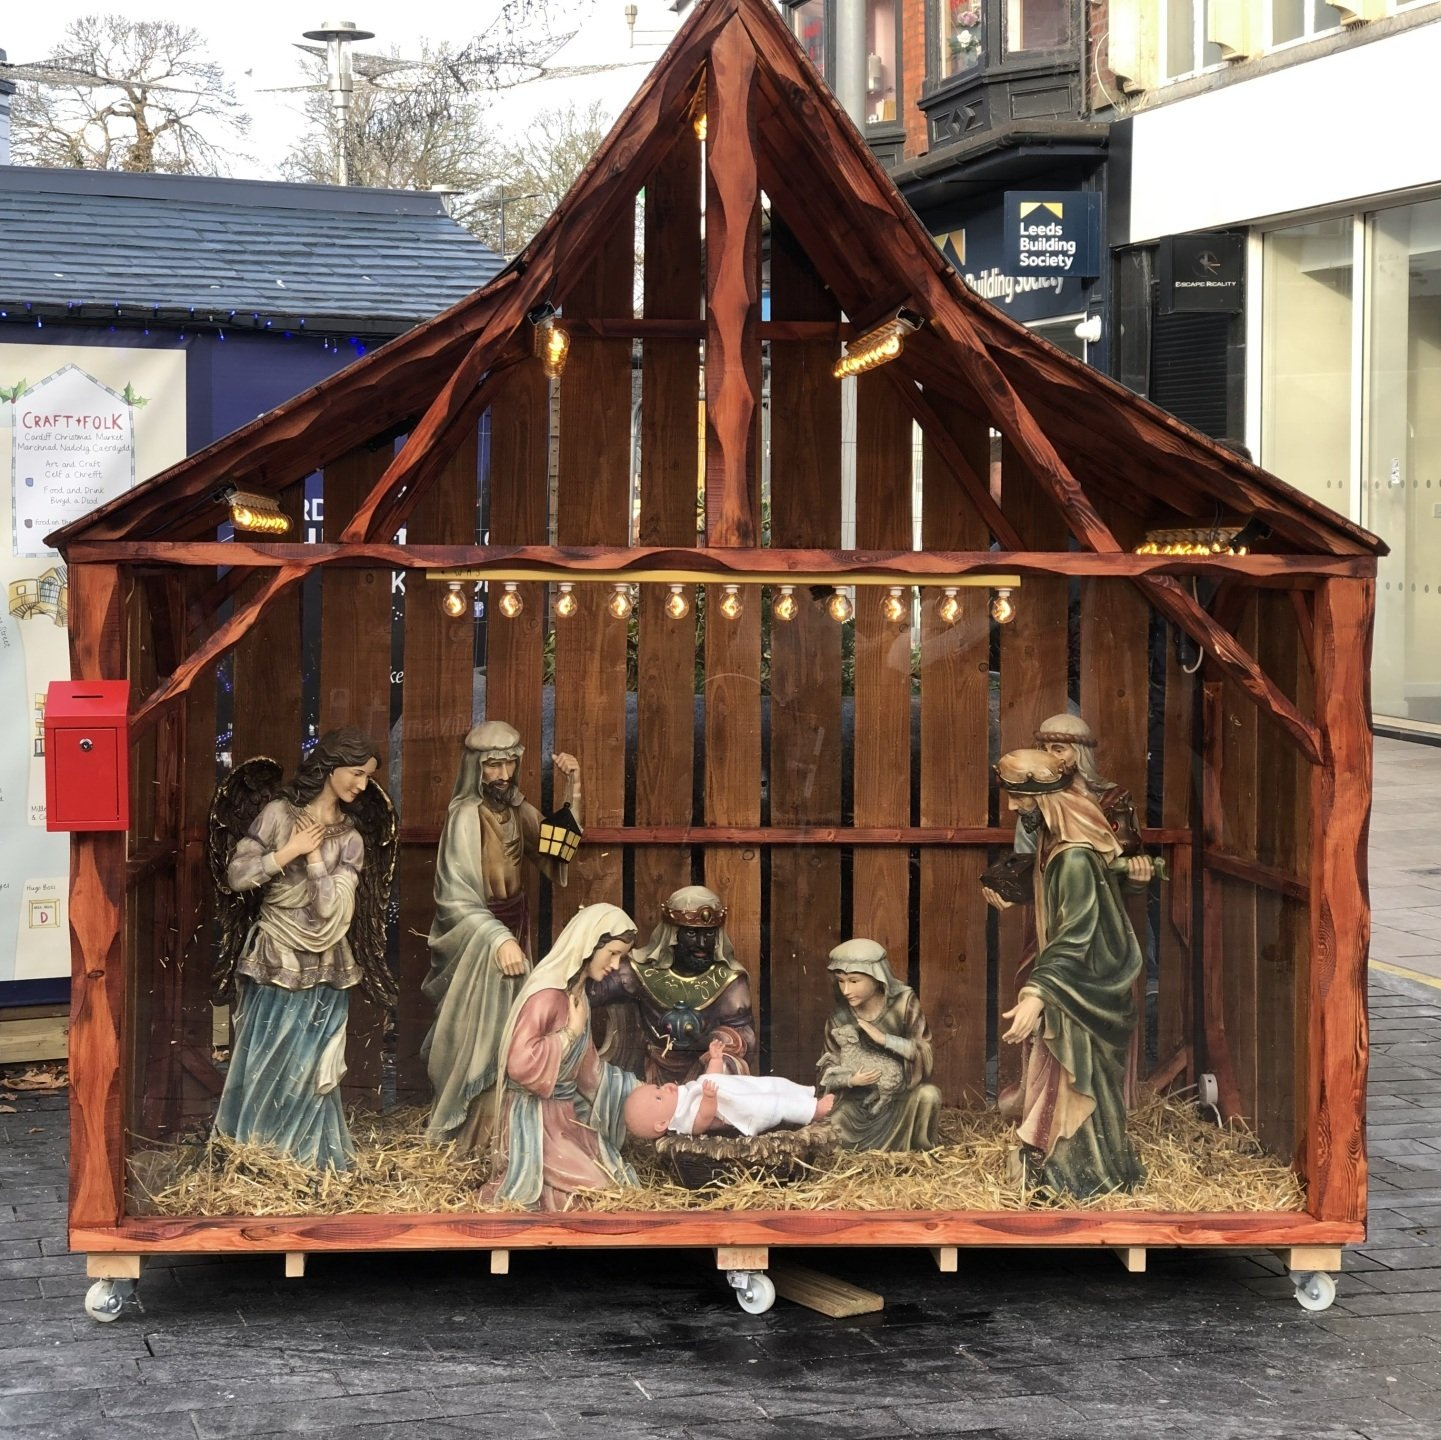 One fancy nativity scene on display in cardiff during lockdown. 